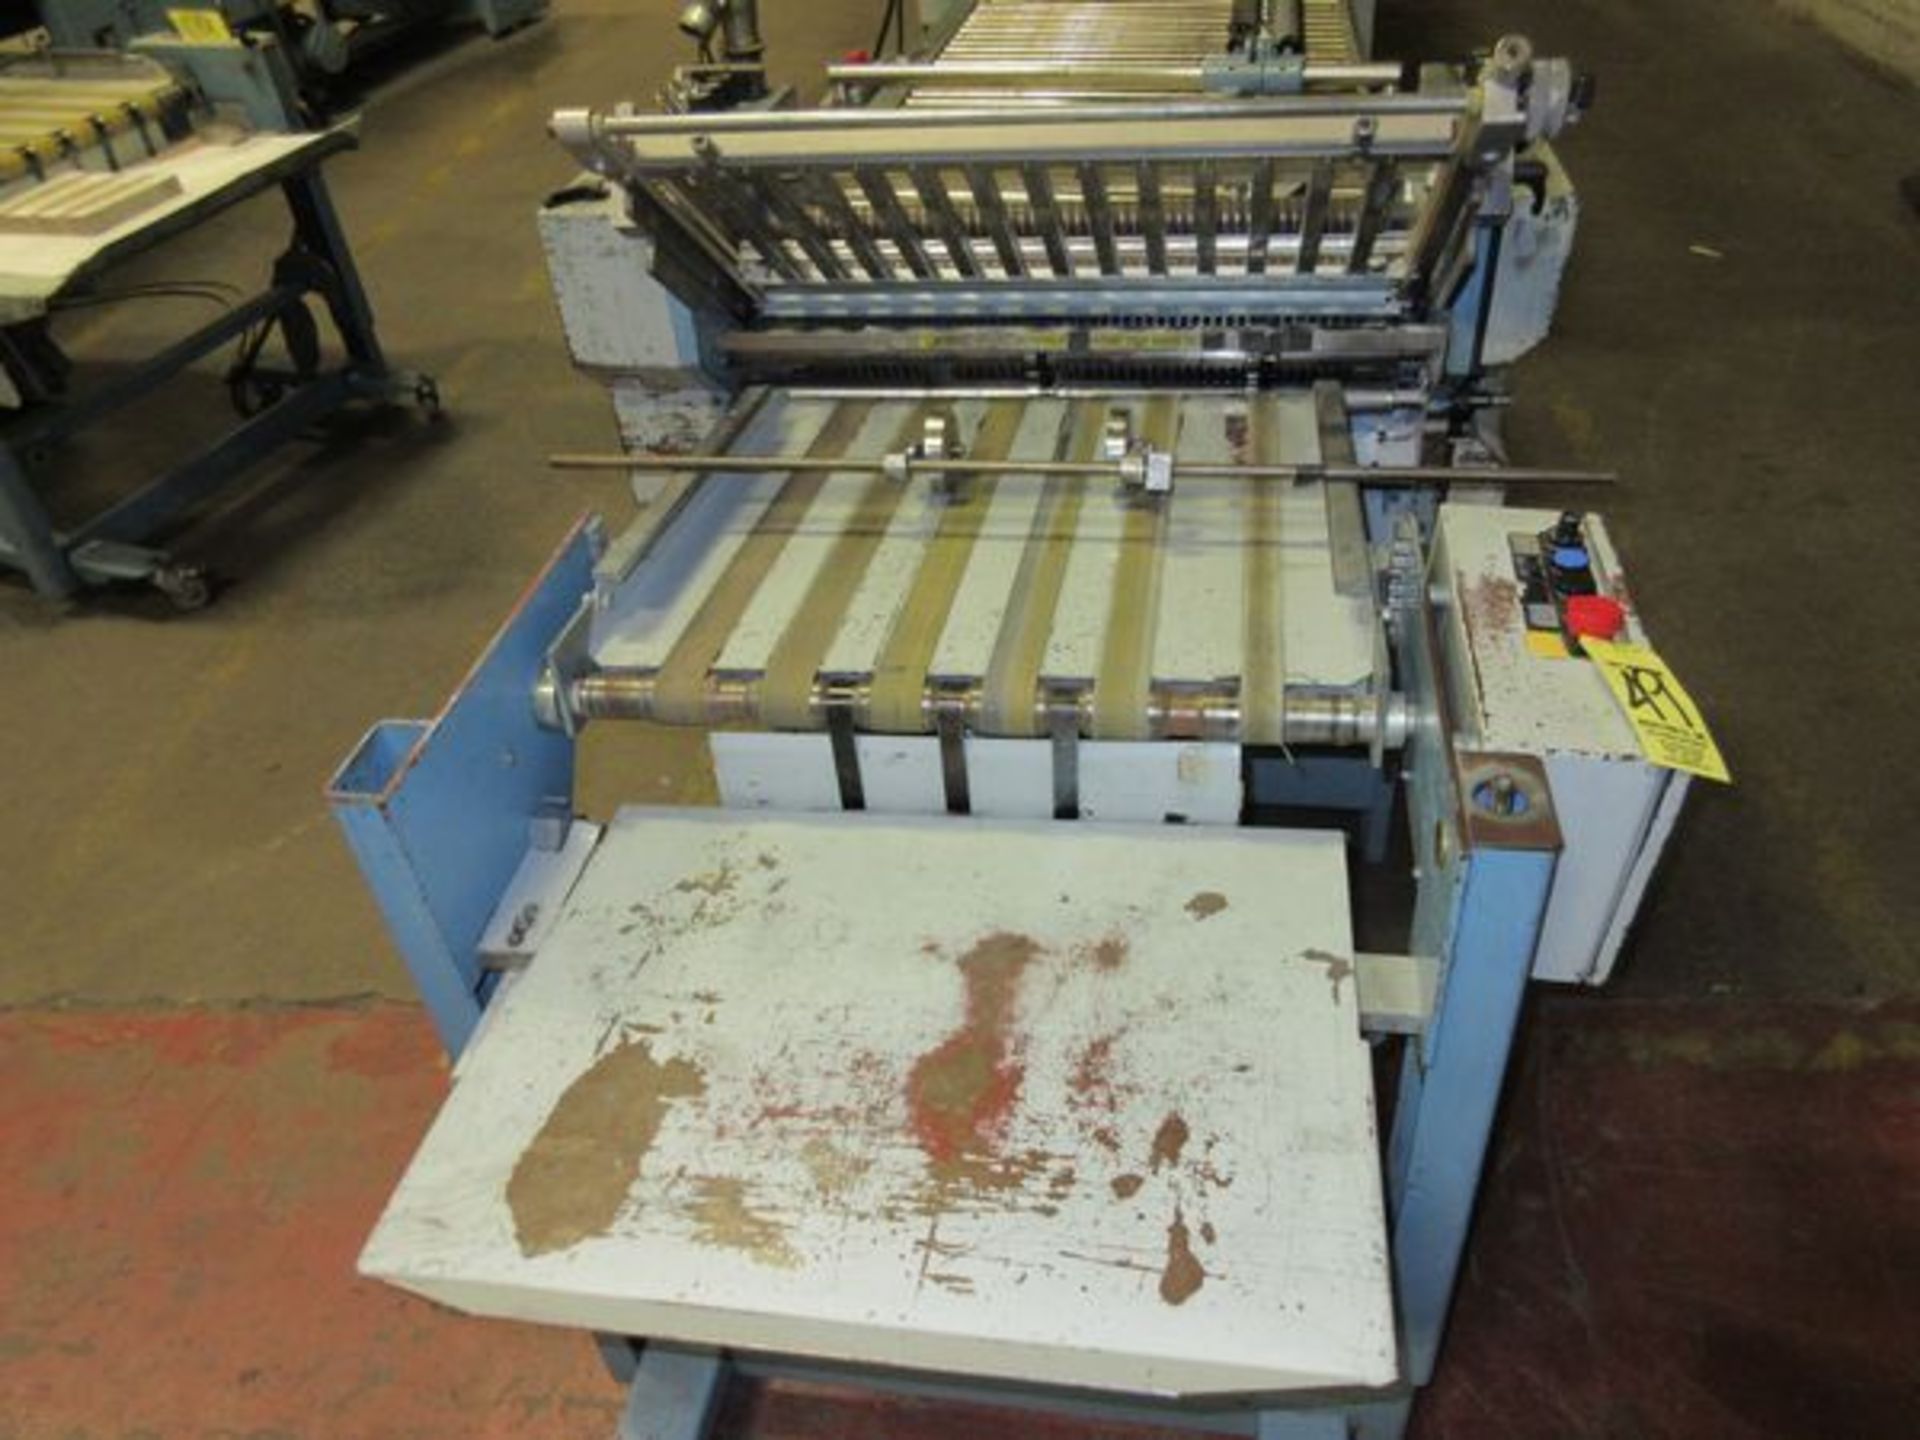 MBO Model B123-C Continuous Feed Folder, Order #960849, s/n N11/07, MCC Counter, Control, Exit - Image 6 of 6